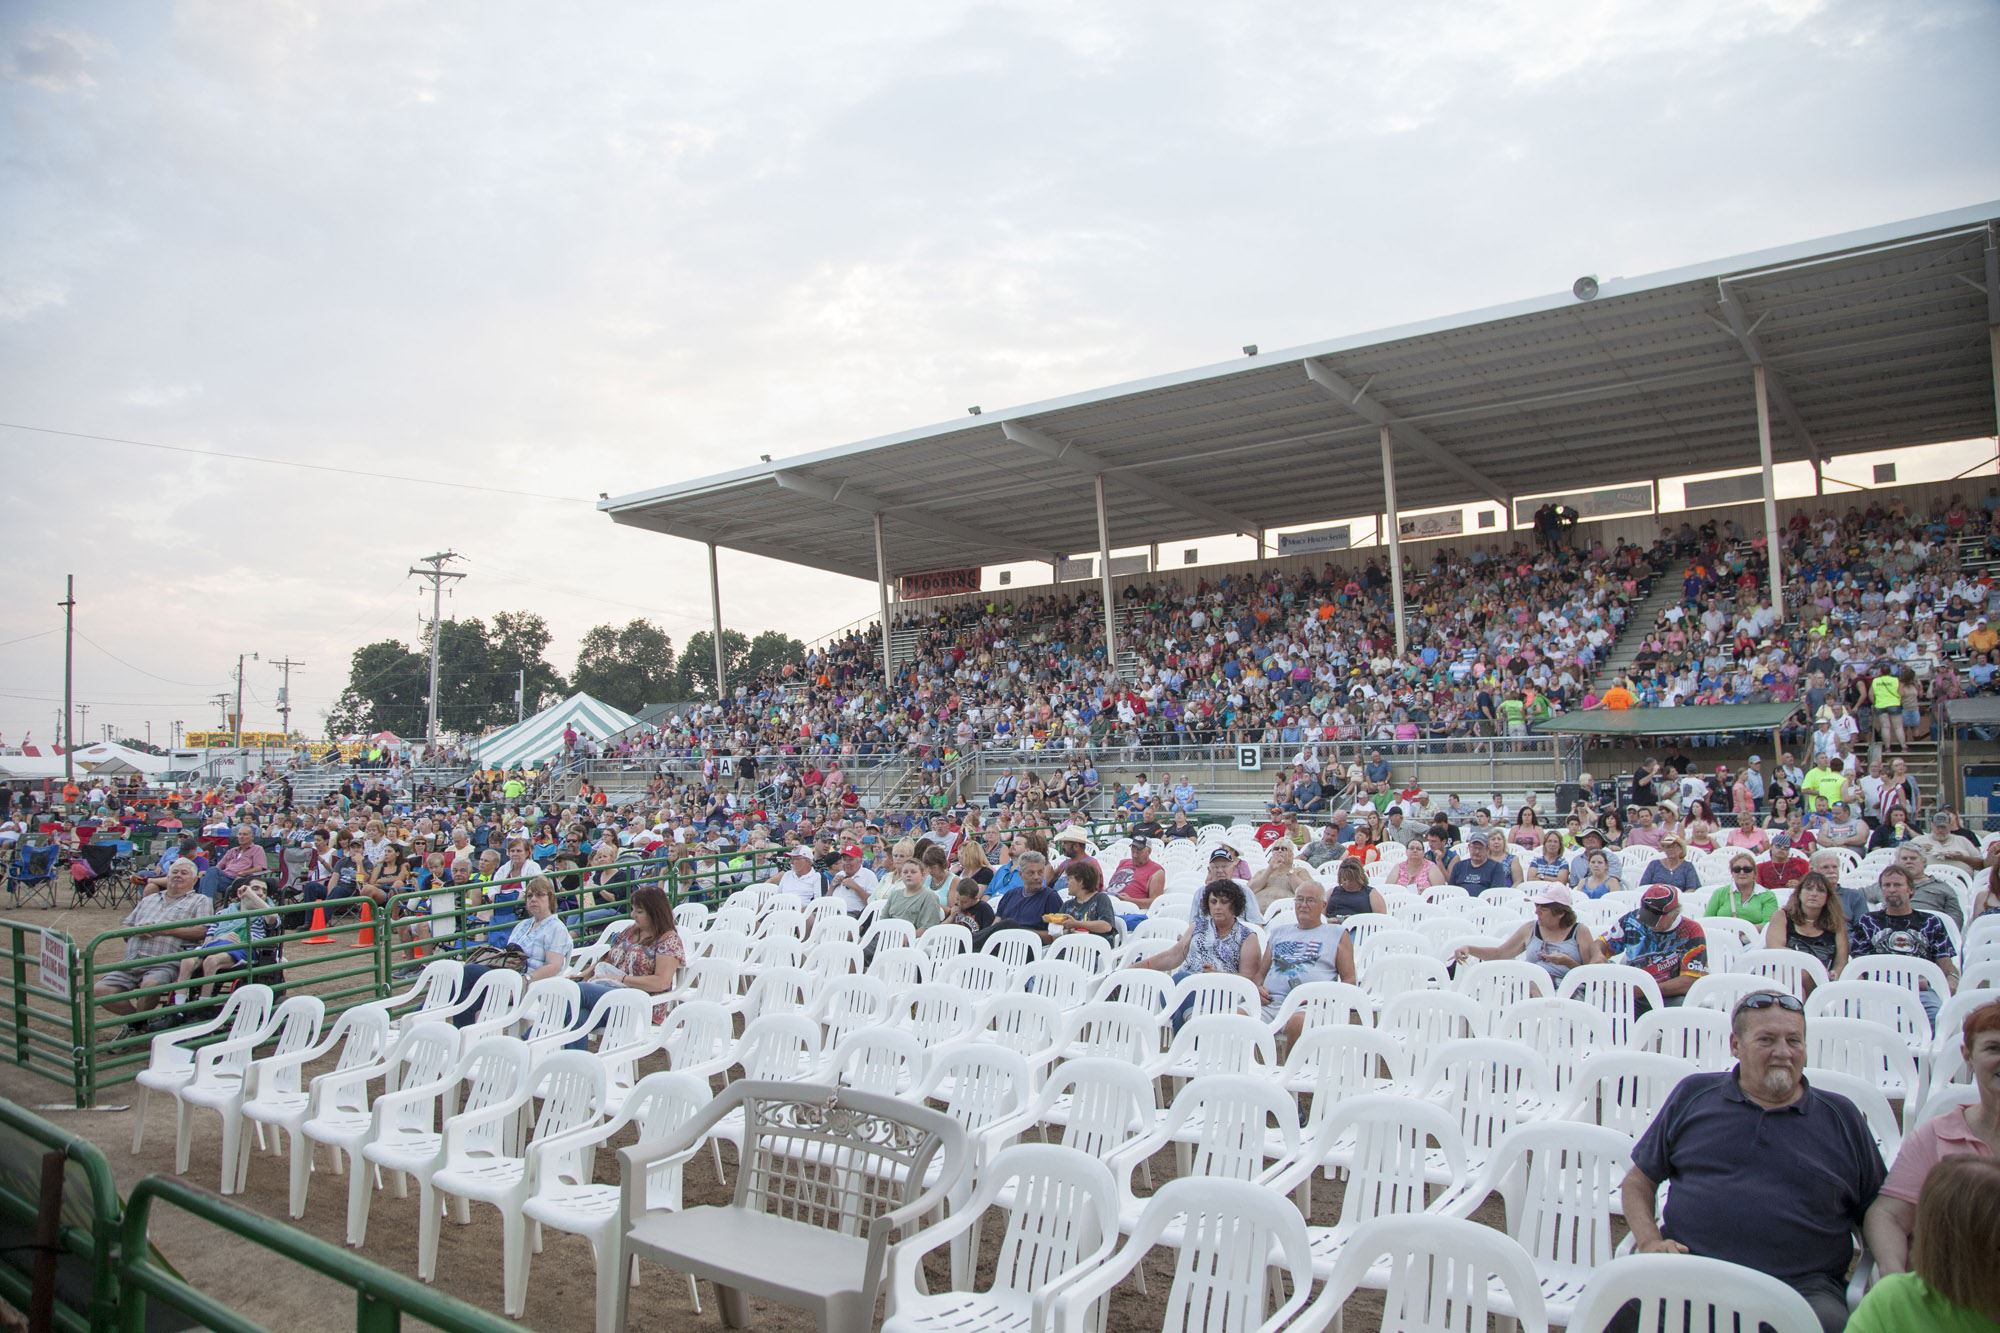 Illinois State Fair Grandstand Seating Capacity